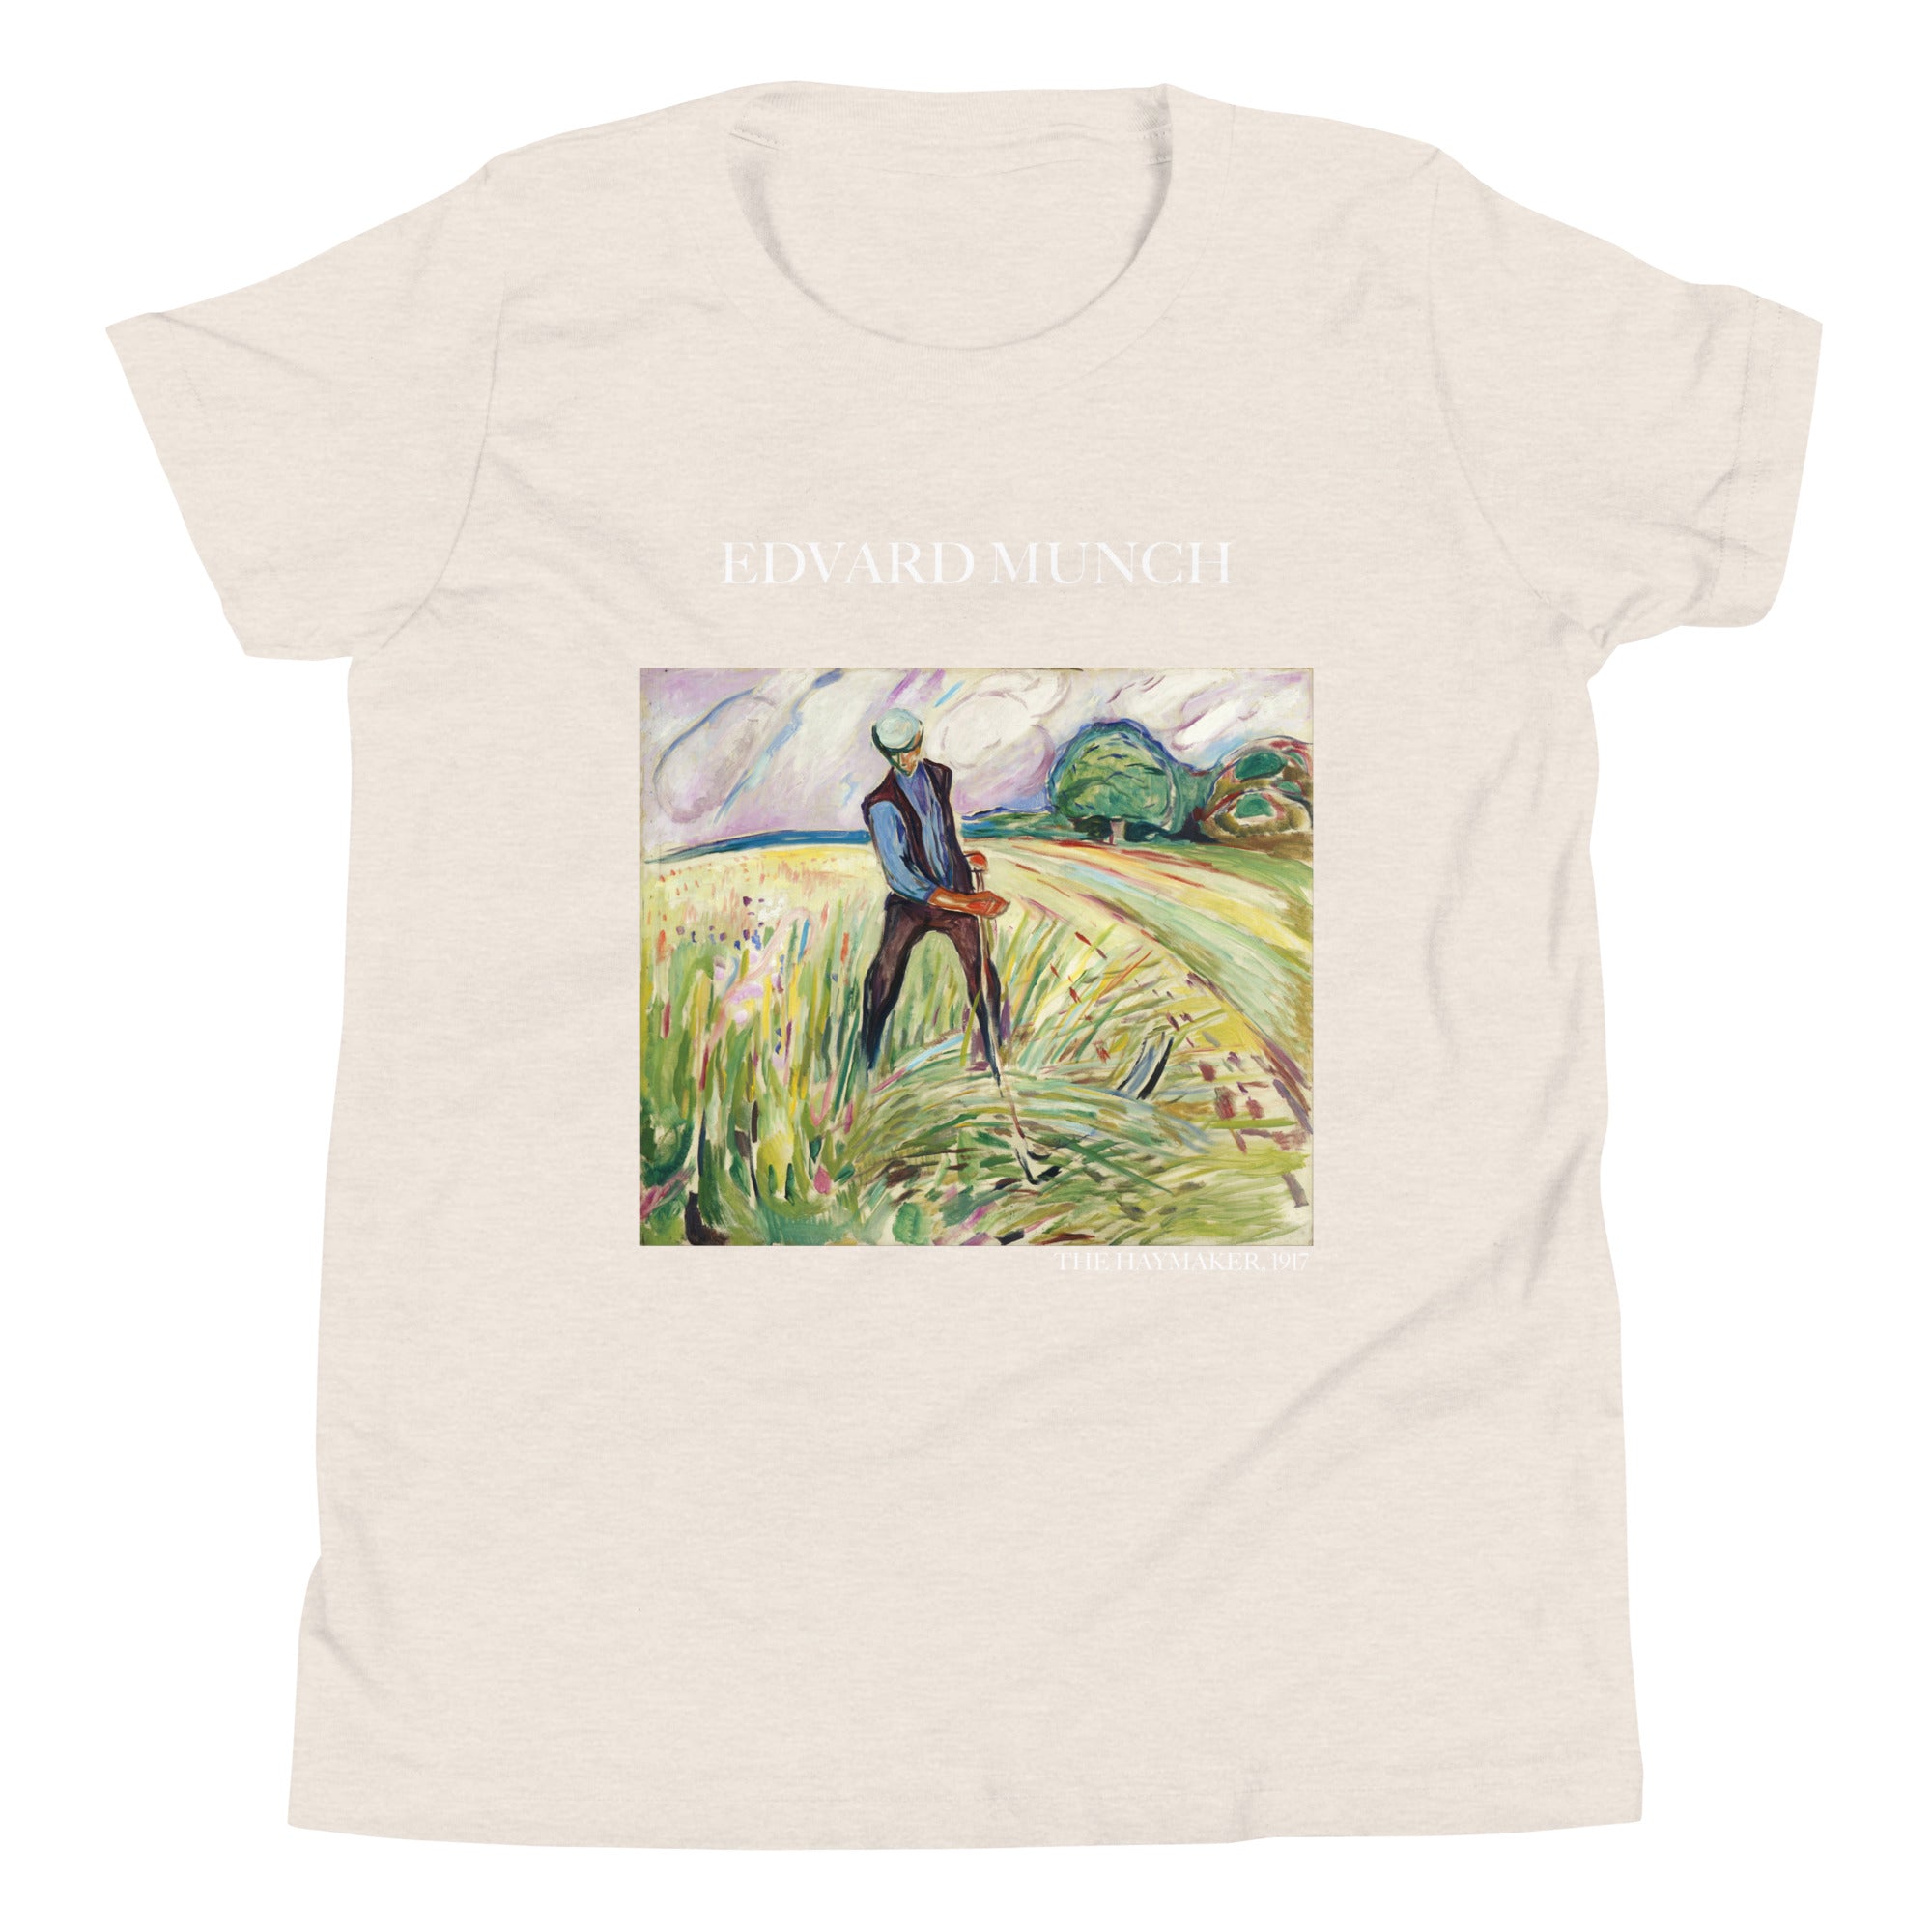 Edvard Munch 'The Haymaker' Famous Painting Short Sleeve T-Shirt | Premium Youth Art Tee